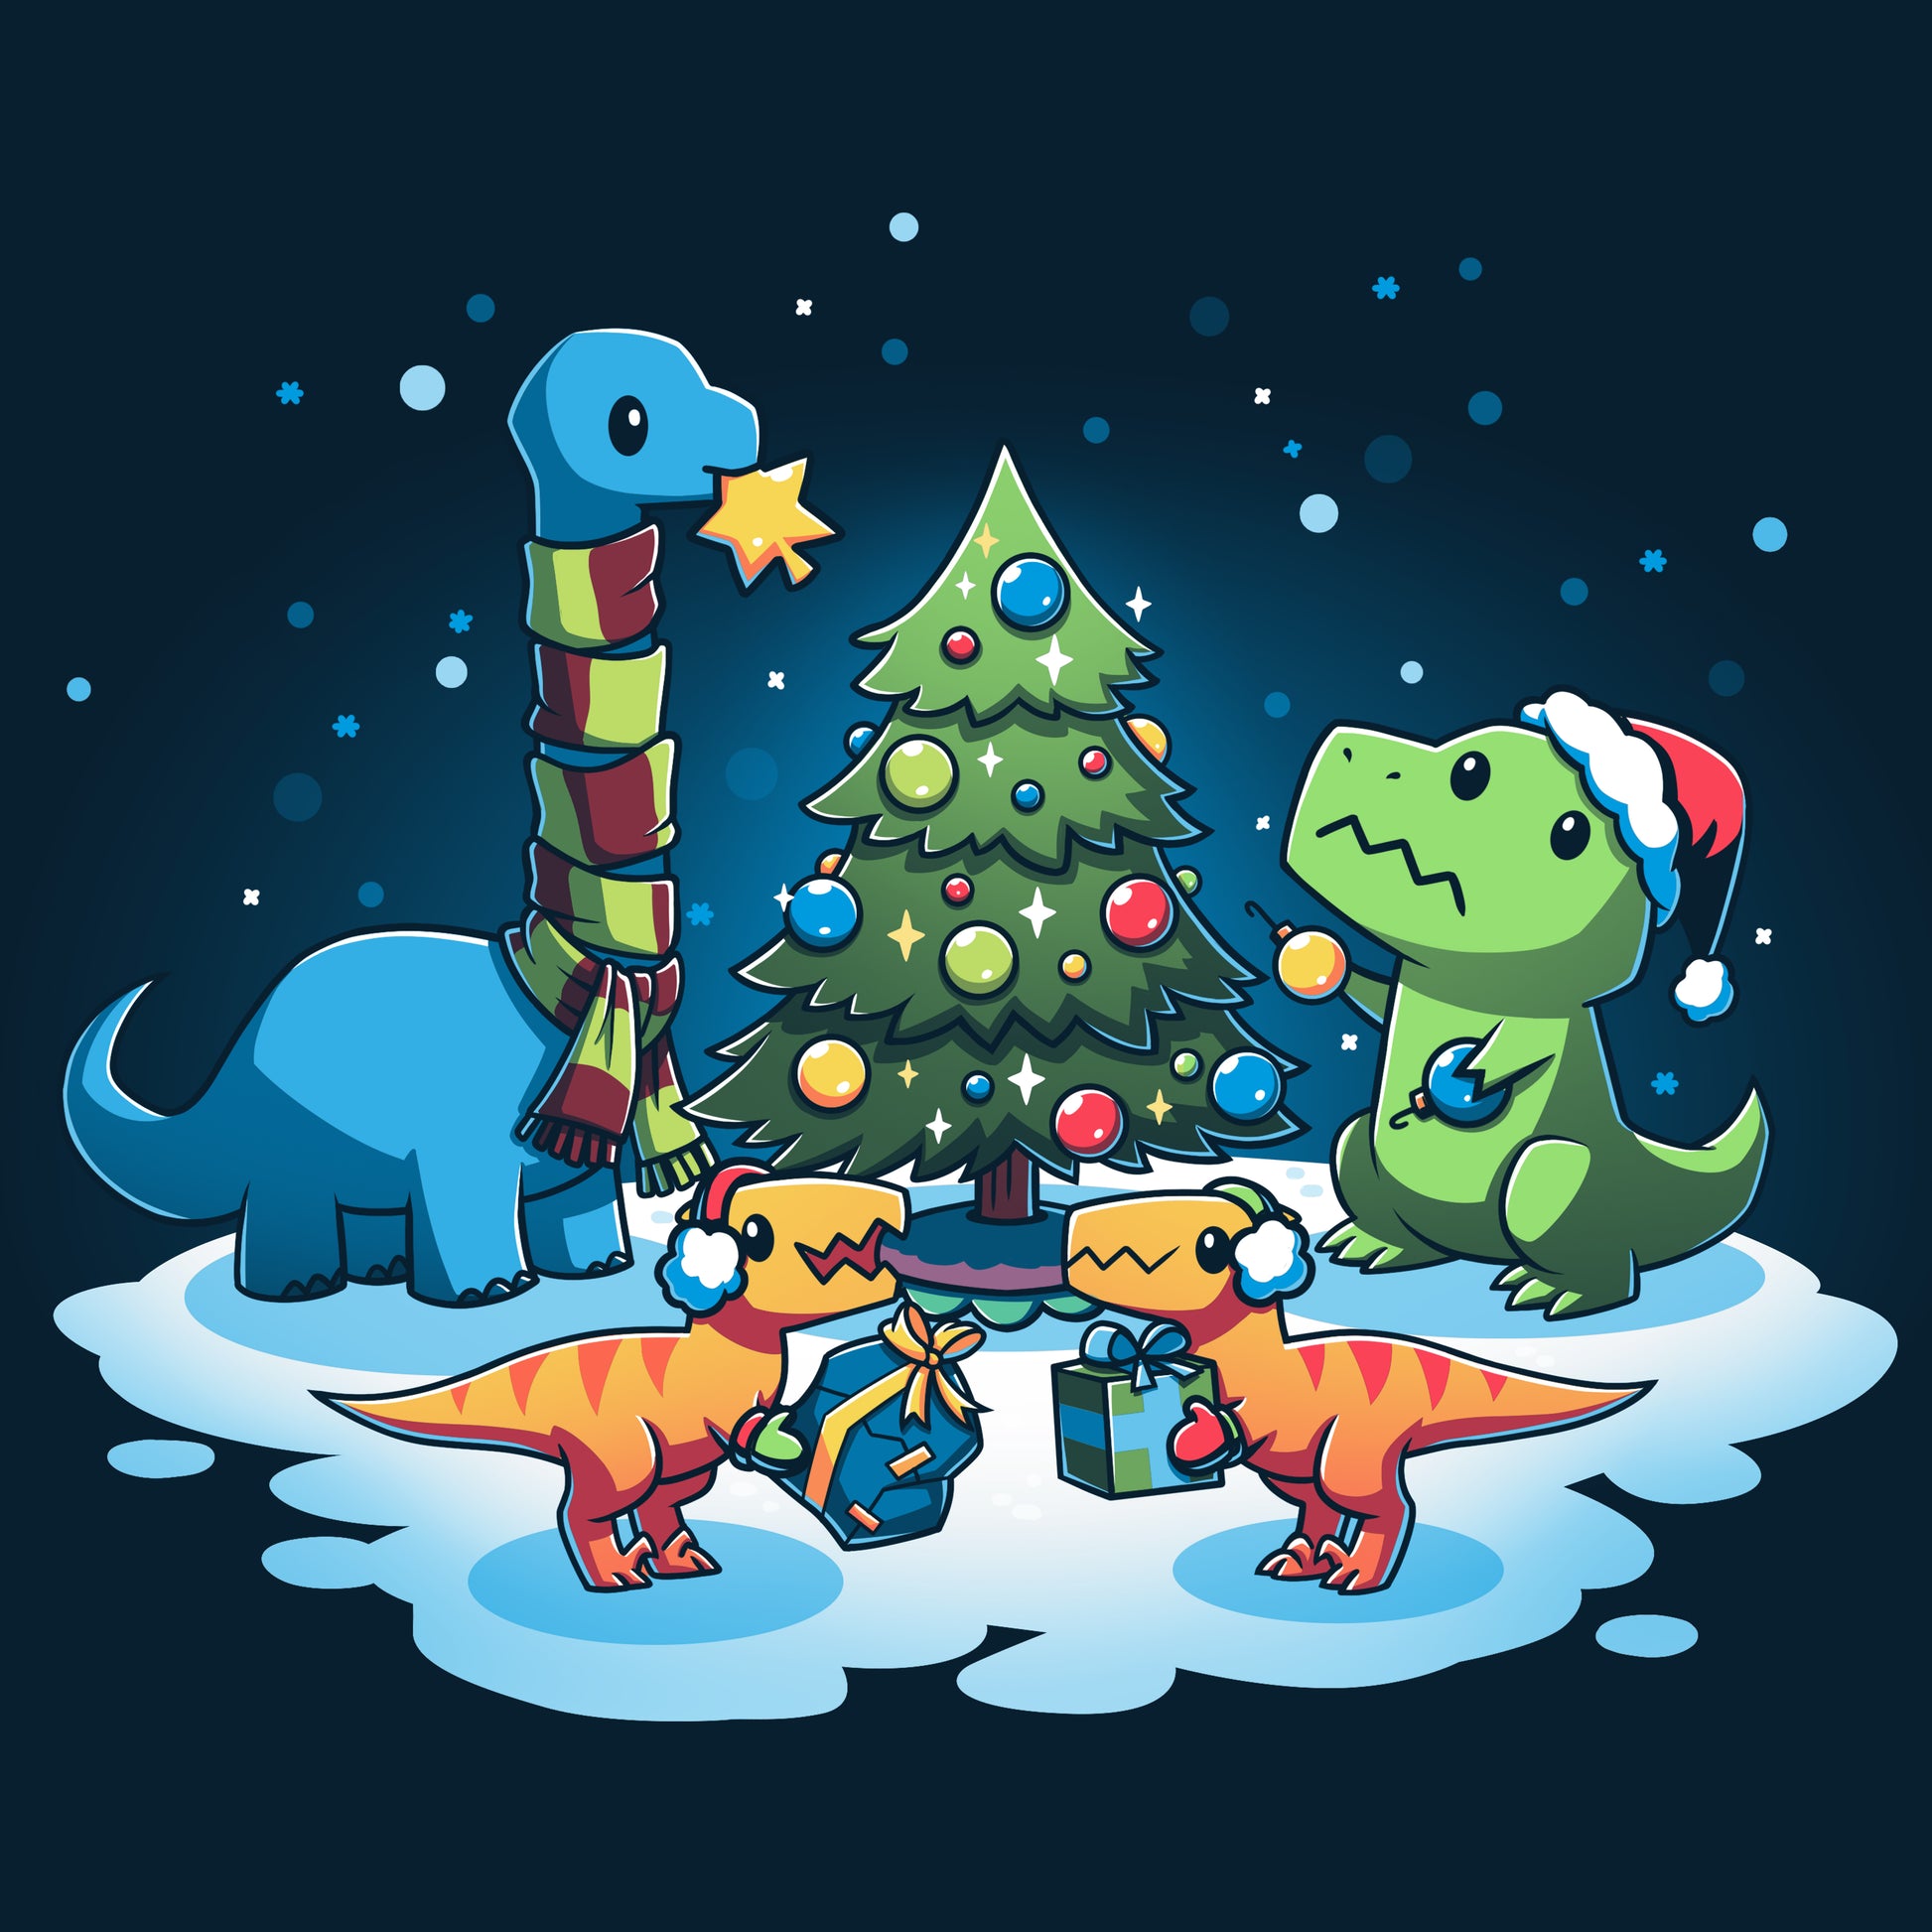 A group of raptors gather around a TeeTurtle Christmas tree, with one holding a A Very Dino Christmas gift.